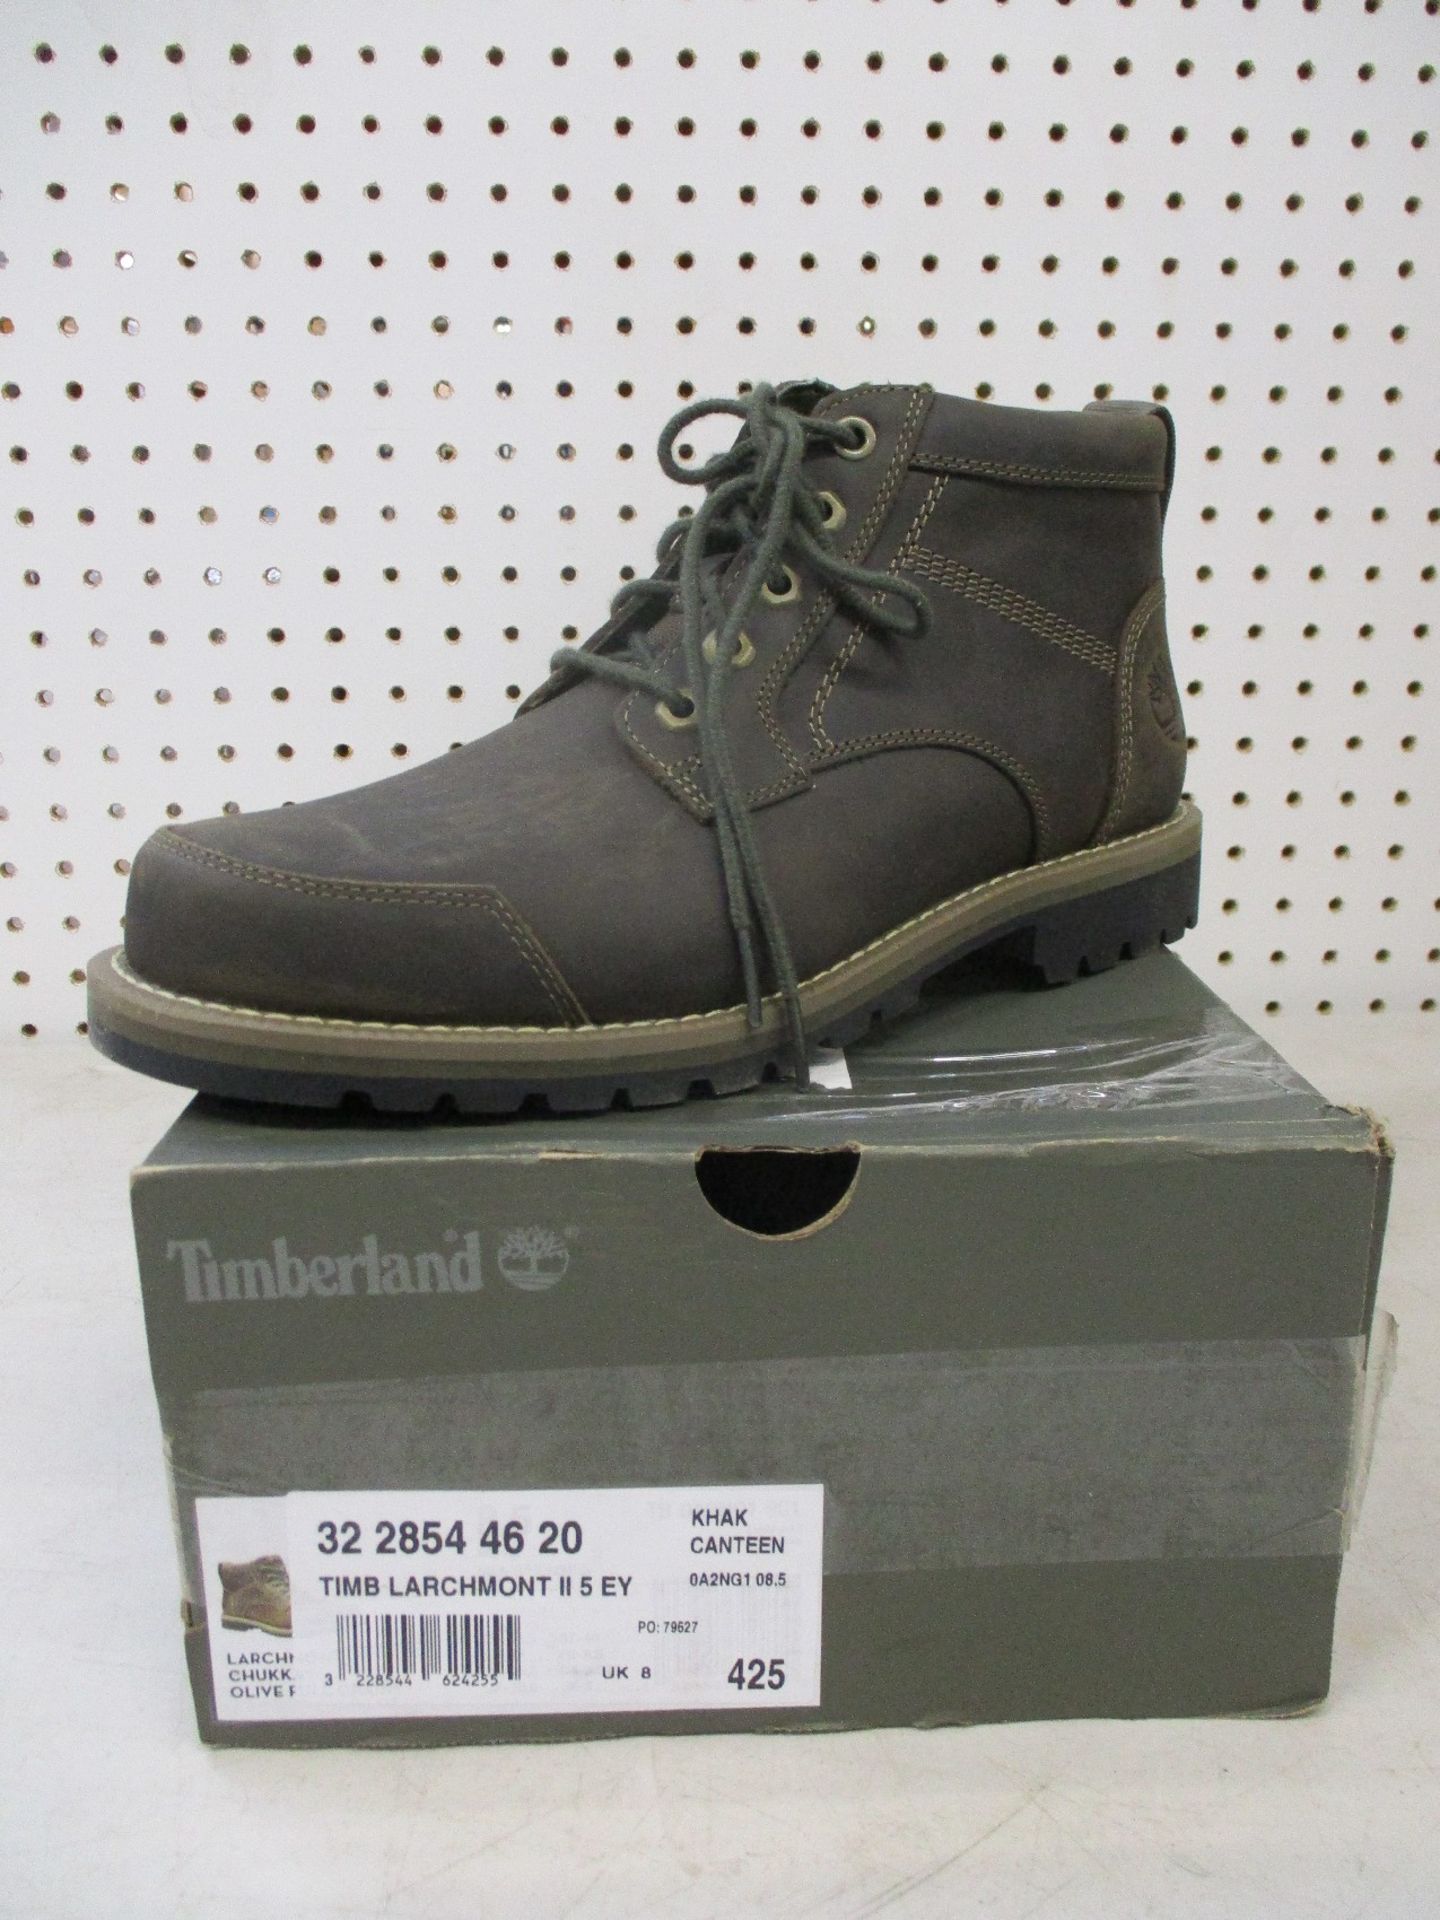 A pair of as new Timberland Larchmont II chukka boots (UK 8).